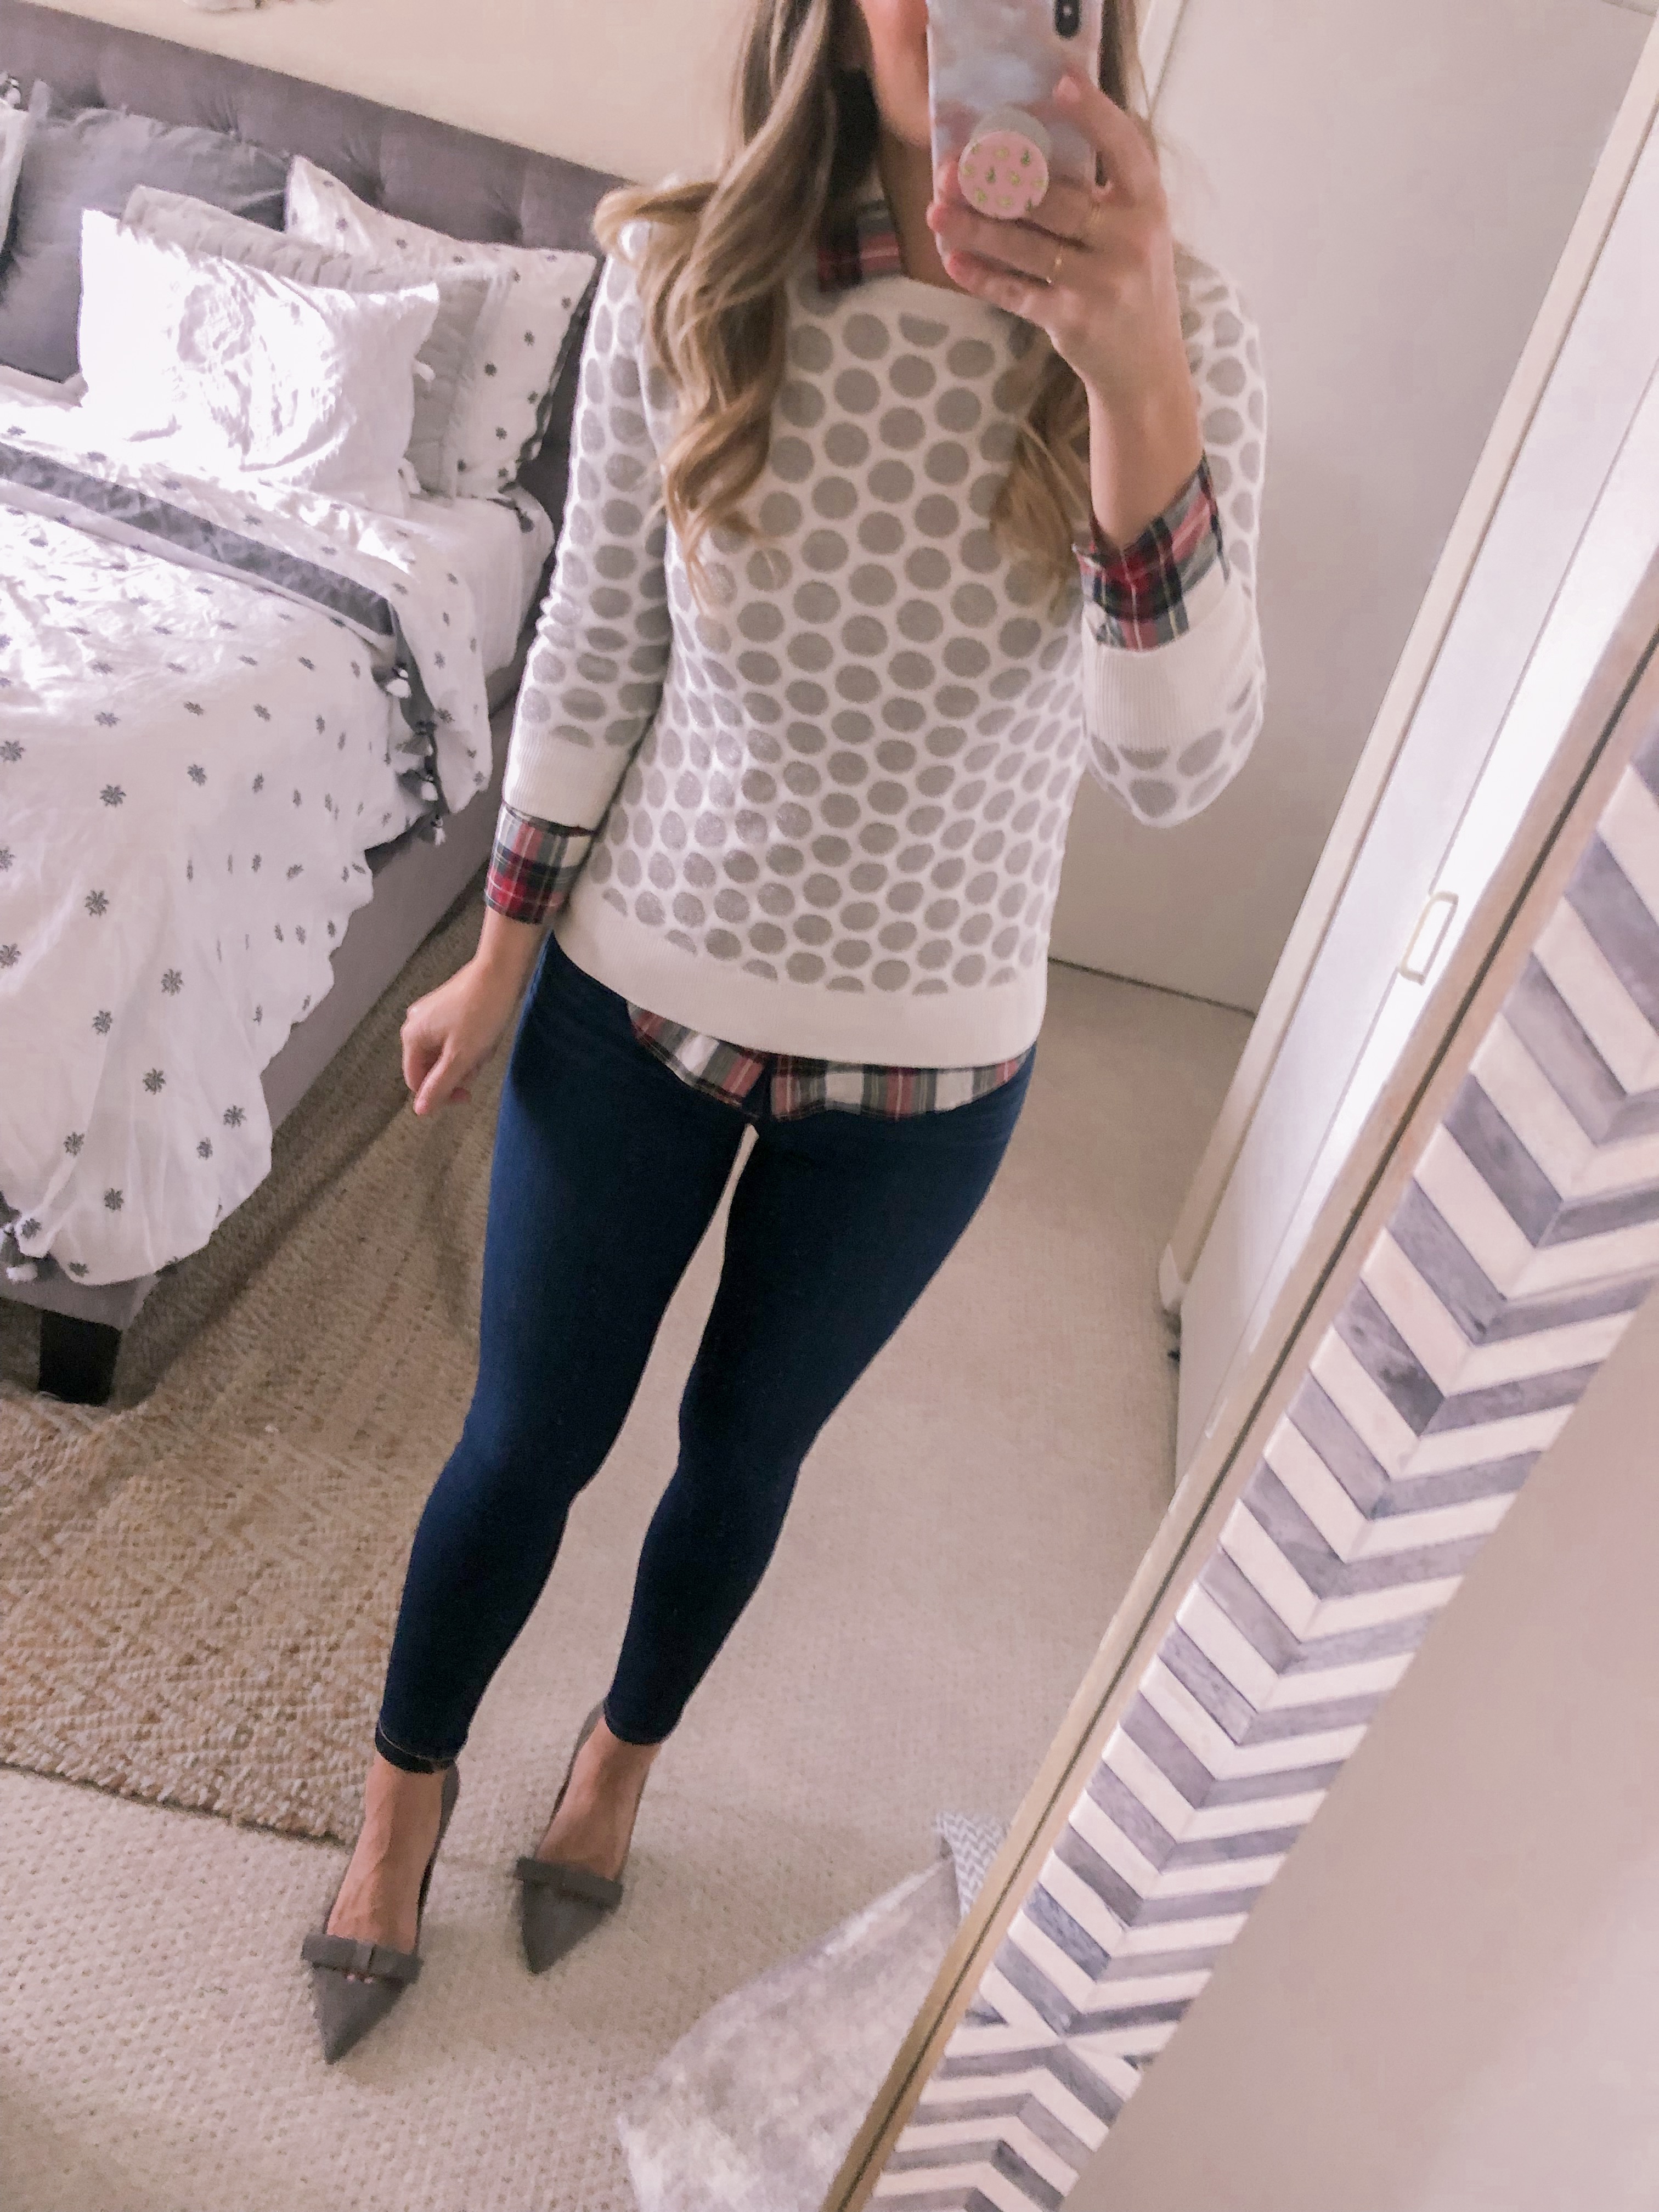 polka dot sweater and plaid shirt for a holiday outfit idea